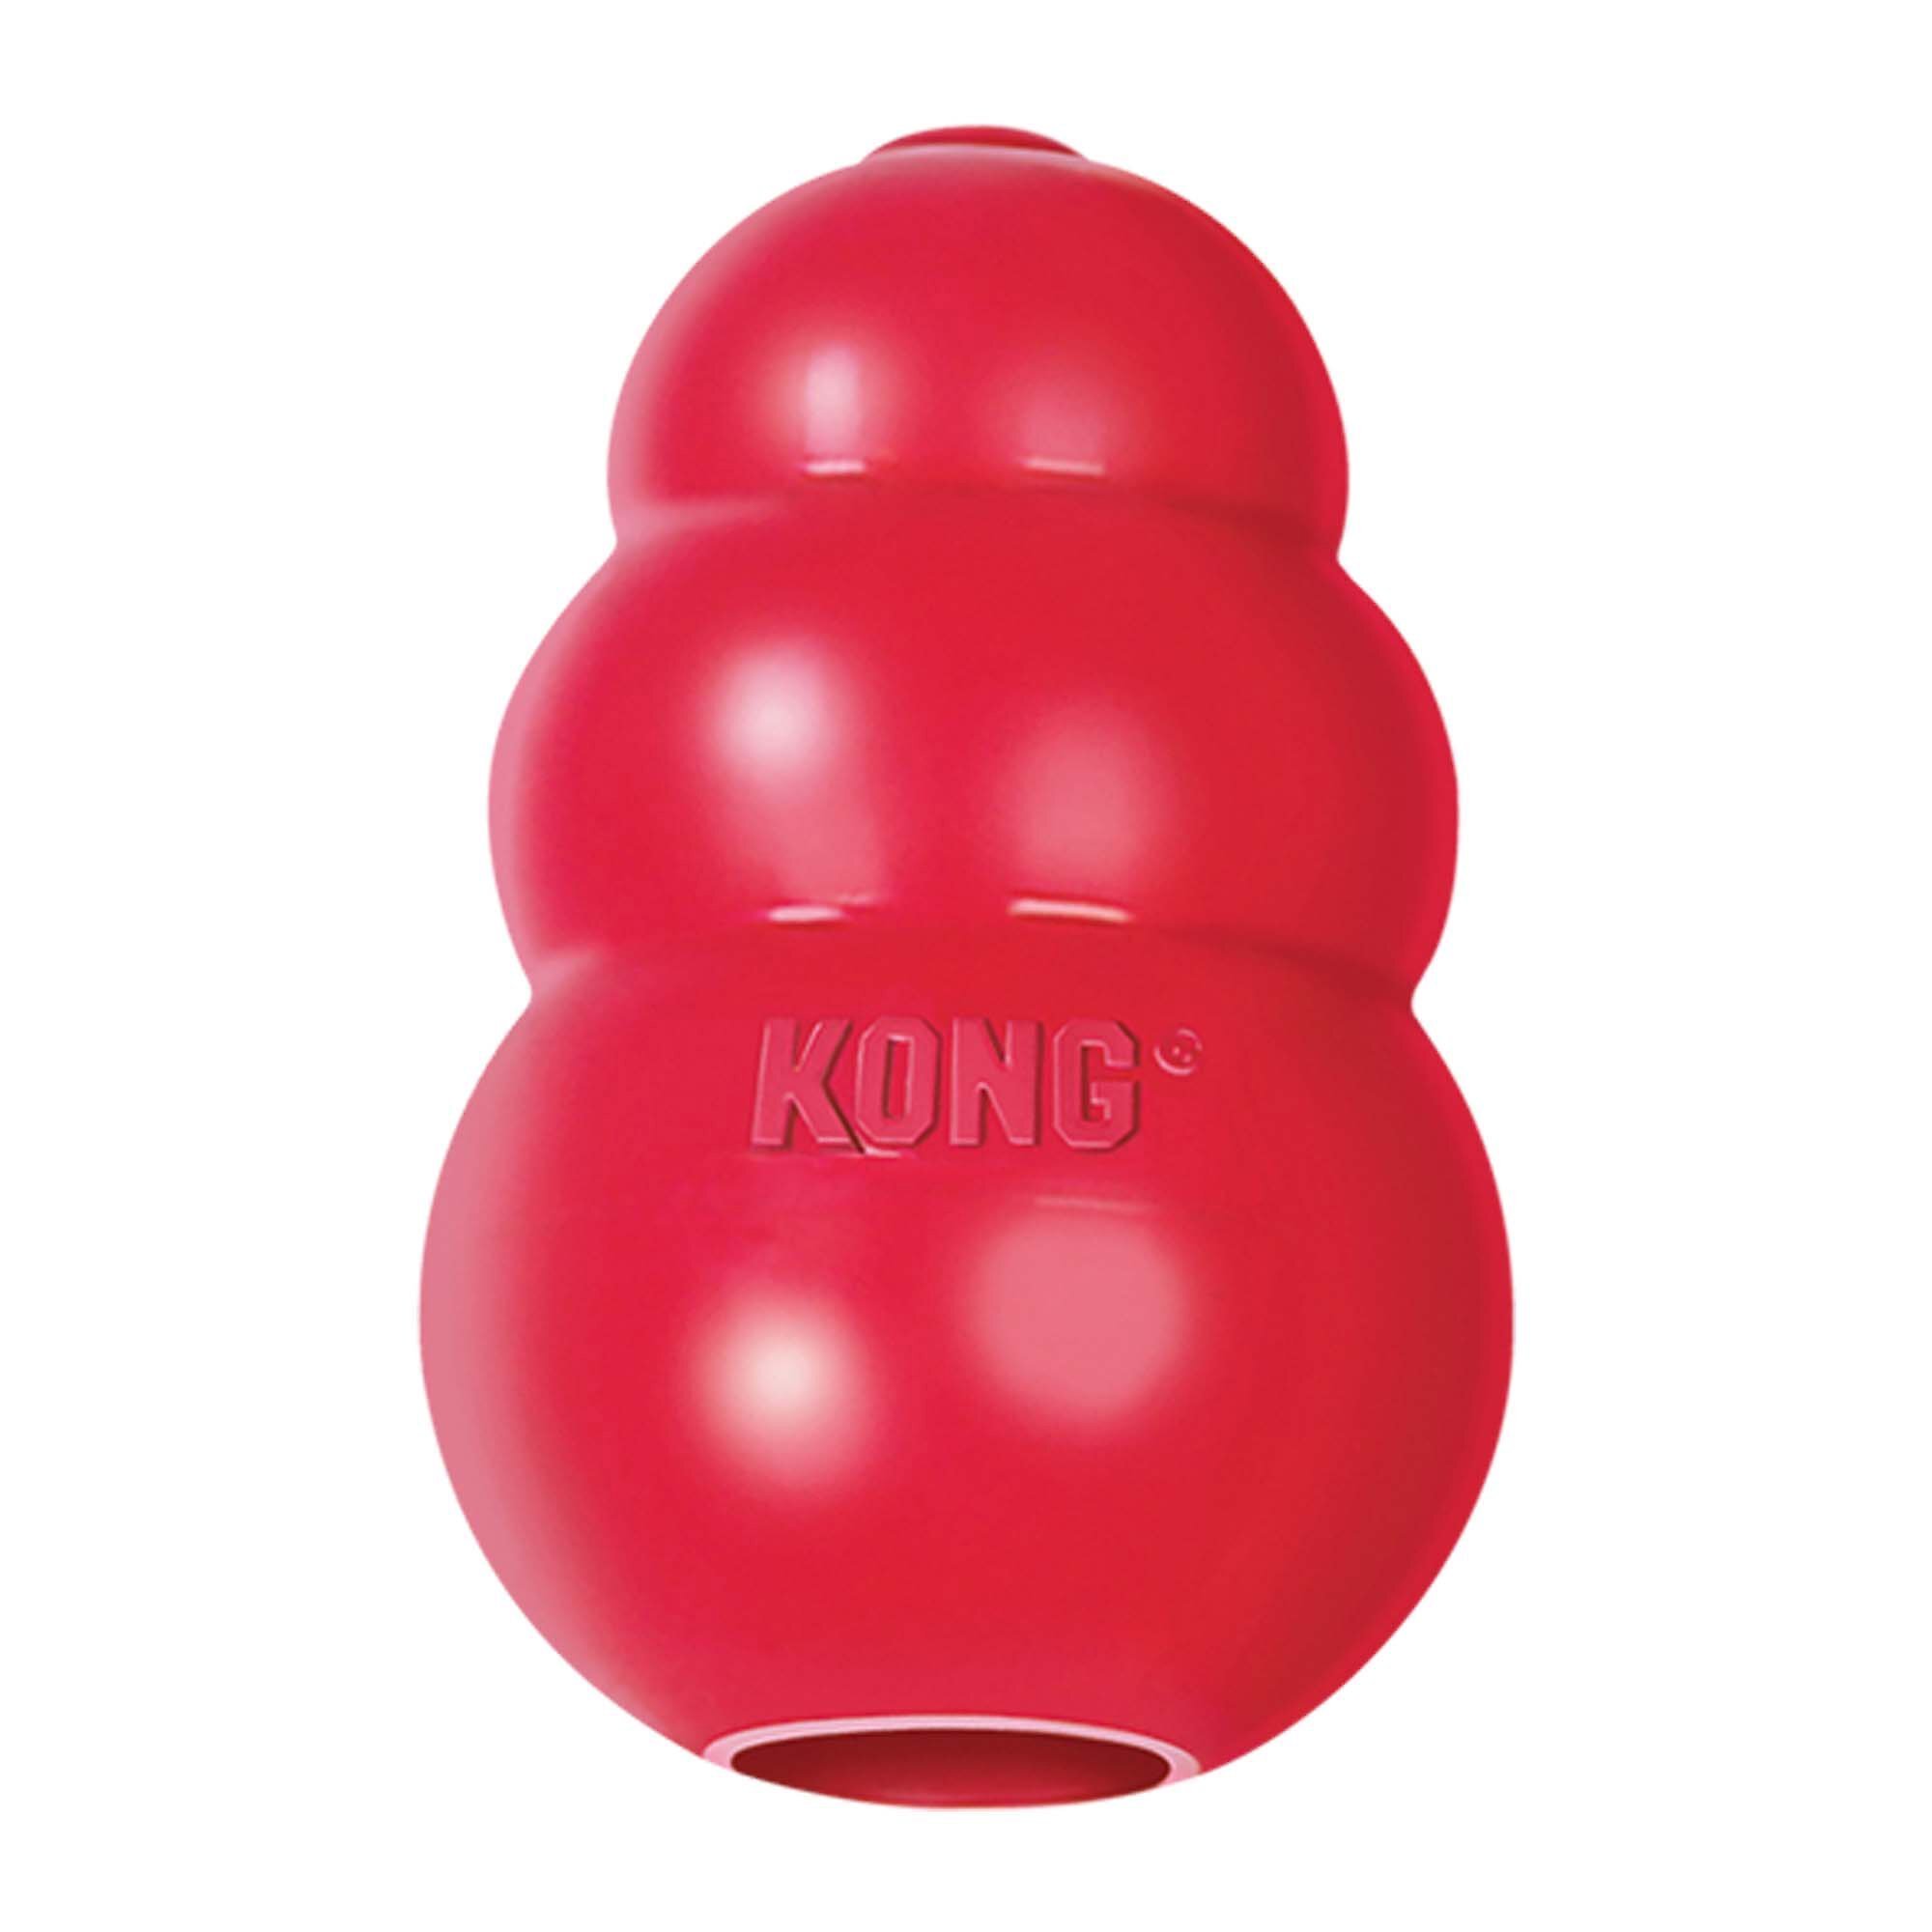 Chewy Review – Kong Classic & Kong Easy Treat